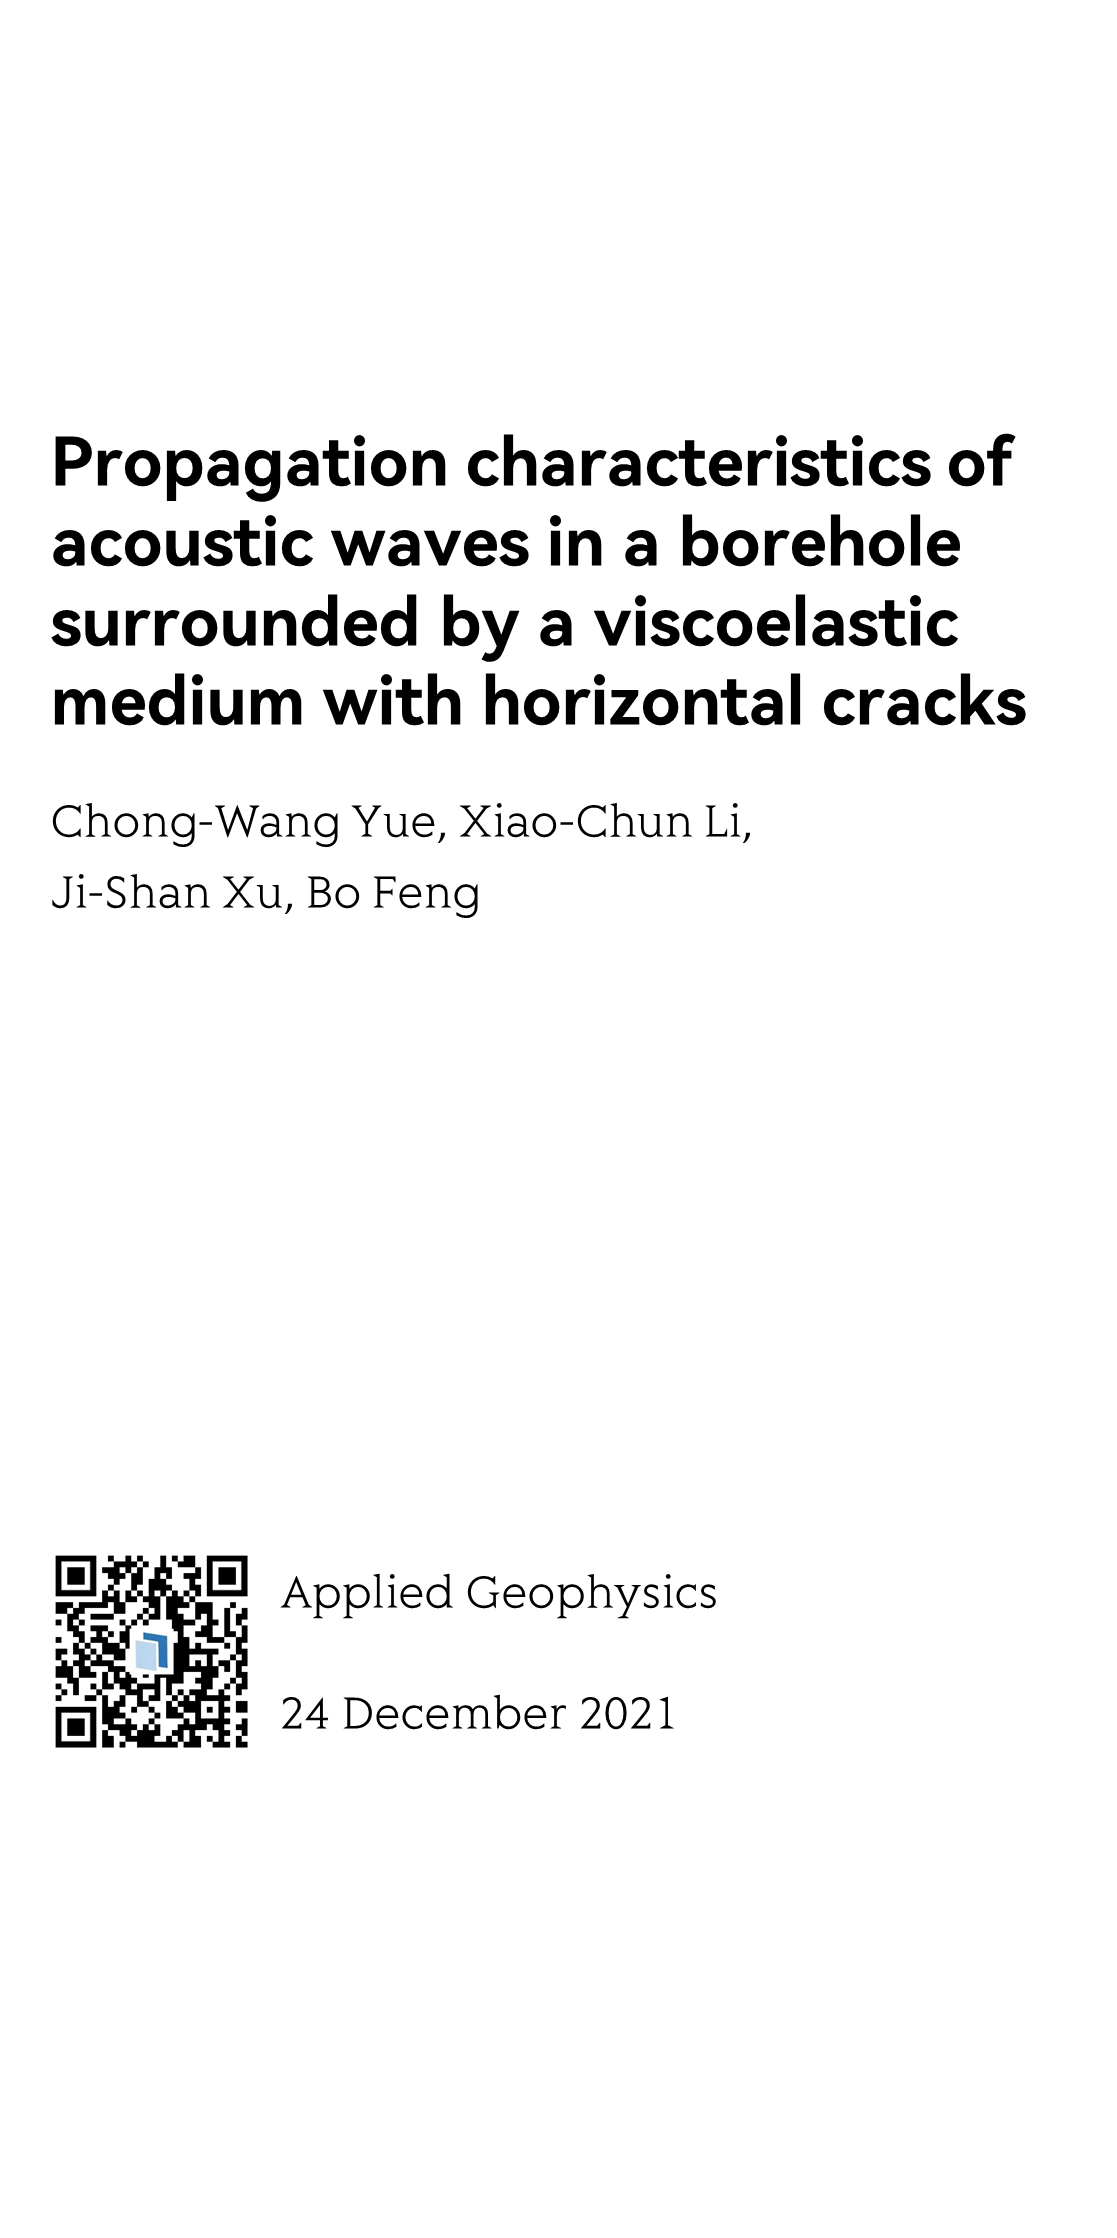 Propagation characteristics of acoustic waves in a borehole surrounded by a viscoelastic medium with horizontal cracks_1